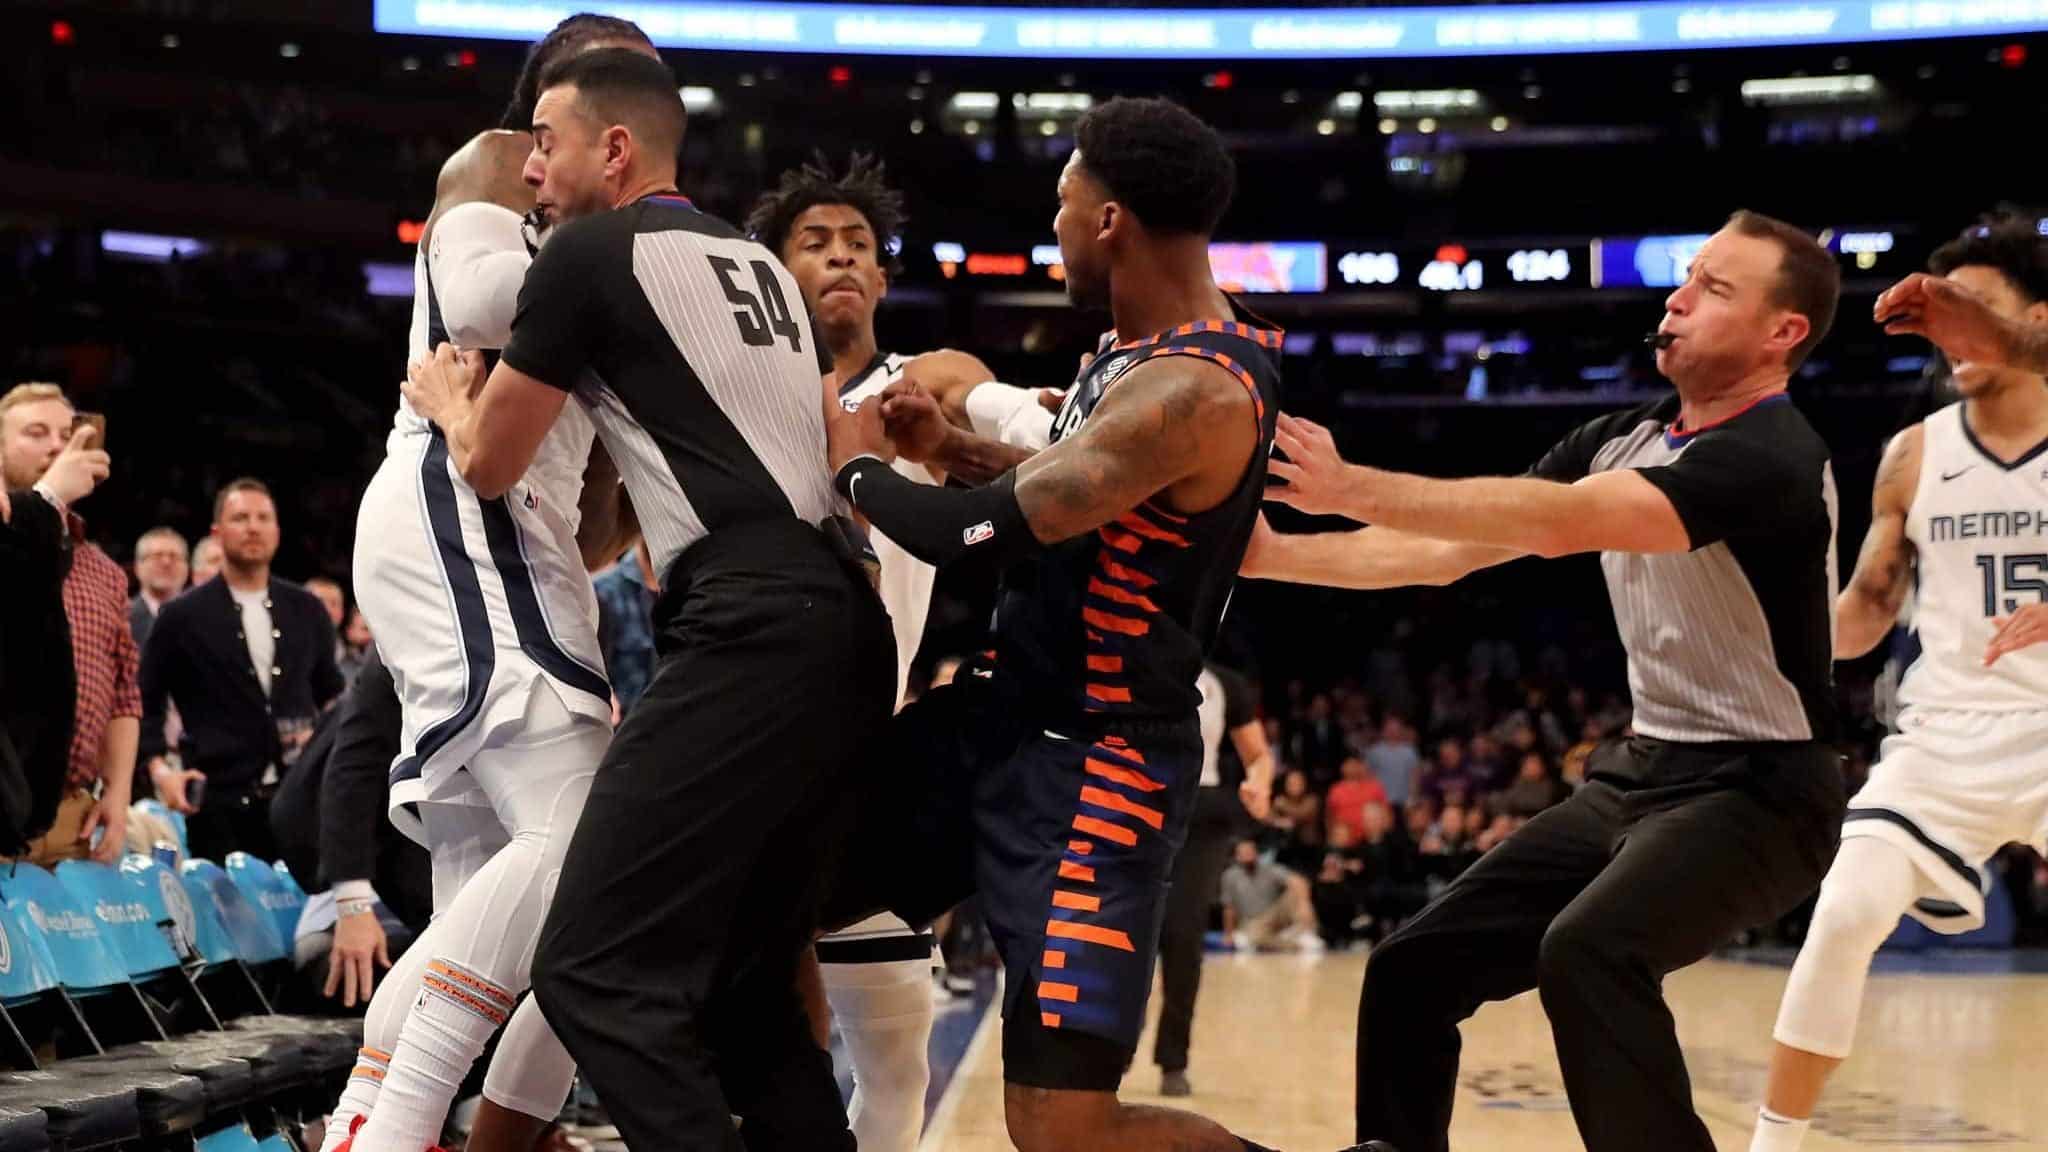 NEW YORK, NEW YORK - JANUARY 29: The referees try to break up a fight between Jae Crowder #99 of the Memphis Grizzlies and Elfrid Payton #6 of the New York Knicks as the benches clear in the final minute of the game at Madison Square Garden on January 29, 2020 in New York City.The Memphis Grizzlies defeated the New York Knicks 127-106.NOTE TO USER: User expressly acknowledges and agrees that, by downloading and or using this photograph, User is consenting to the terms and conditions of the Getty Images License Agreement.